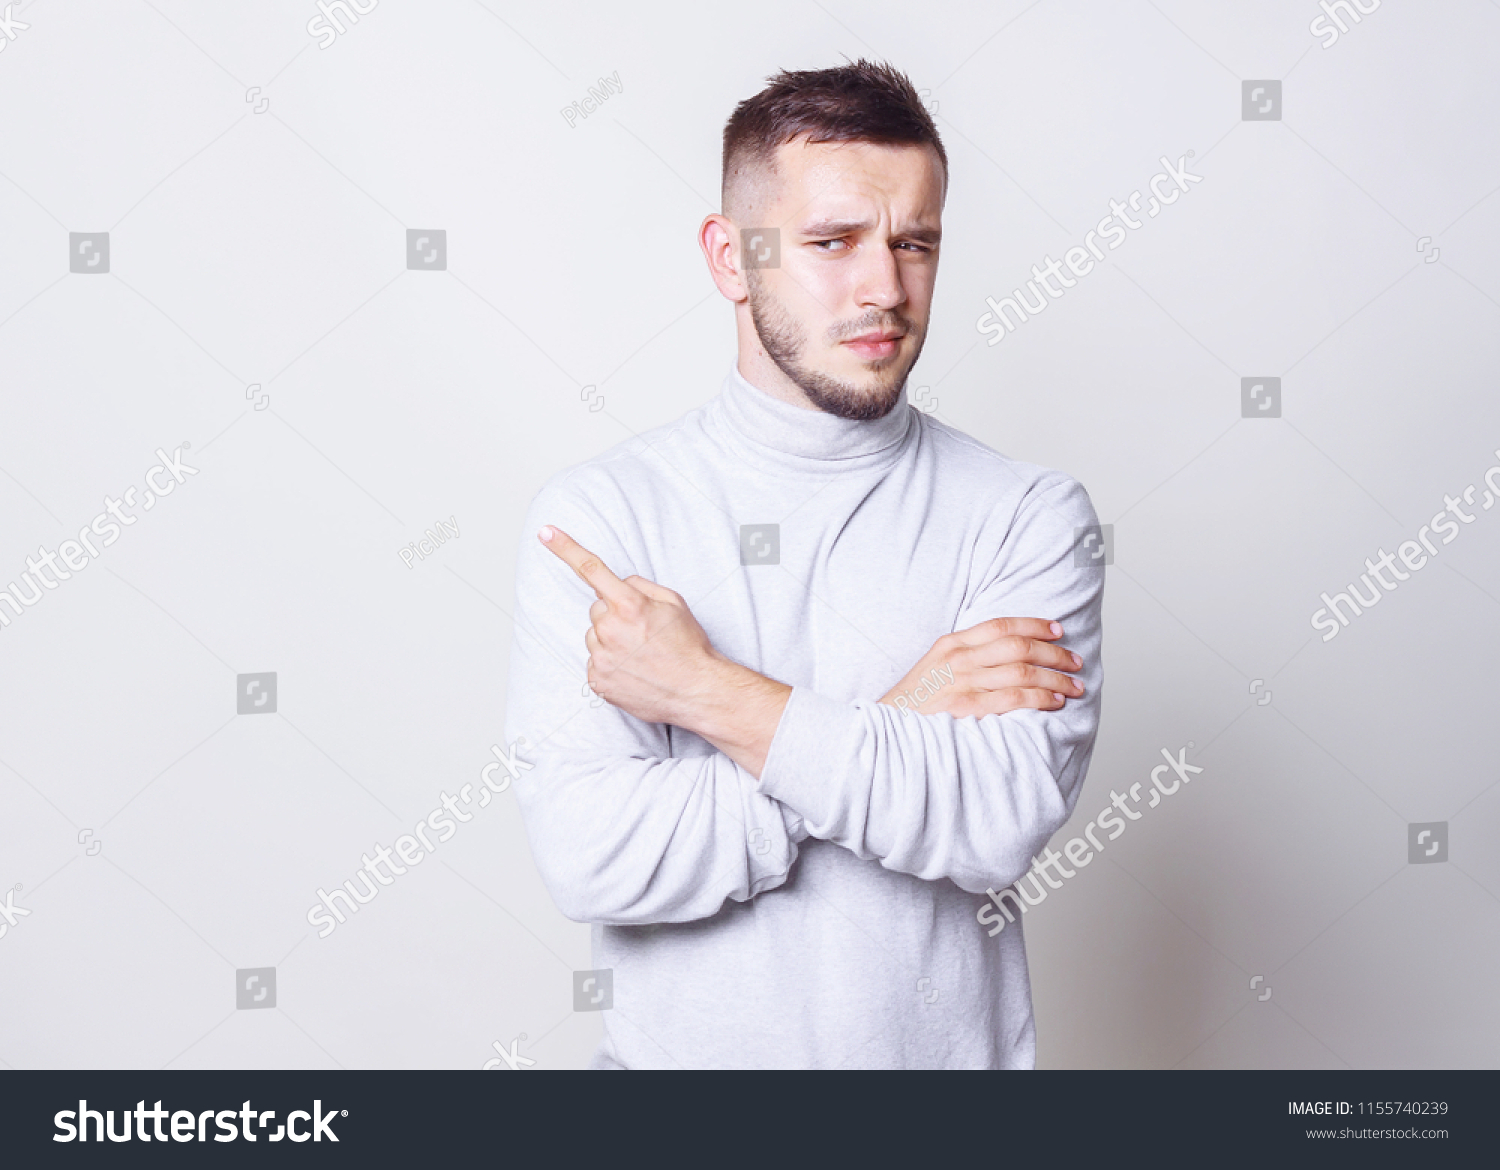 749 Man with arms crossed over his chest Stock Photos, Images ...